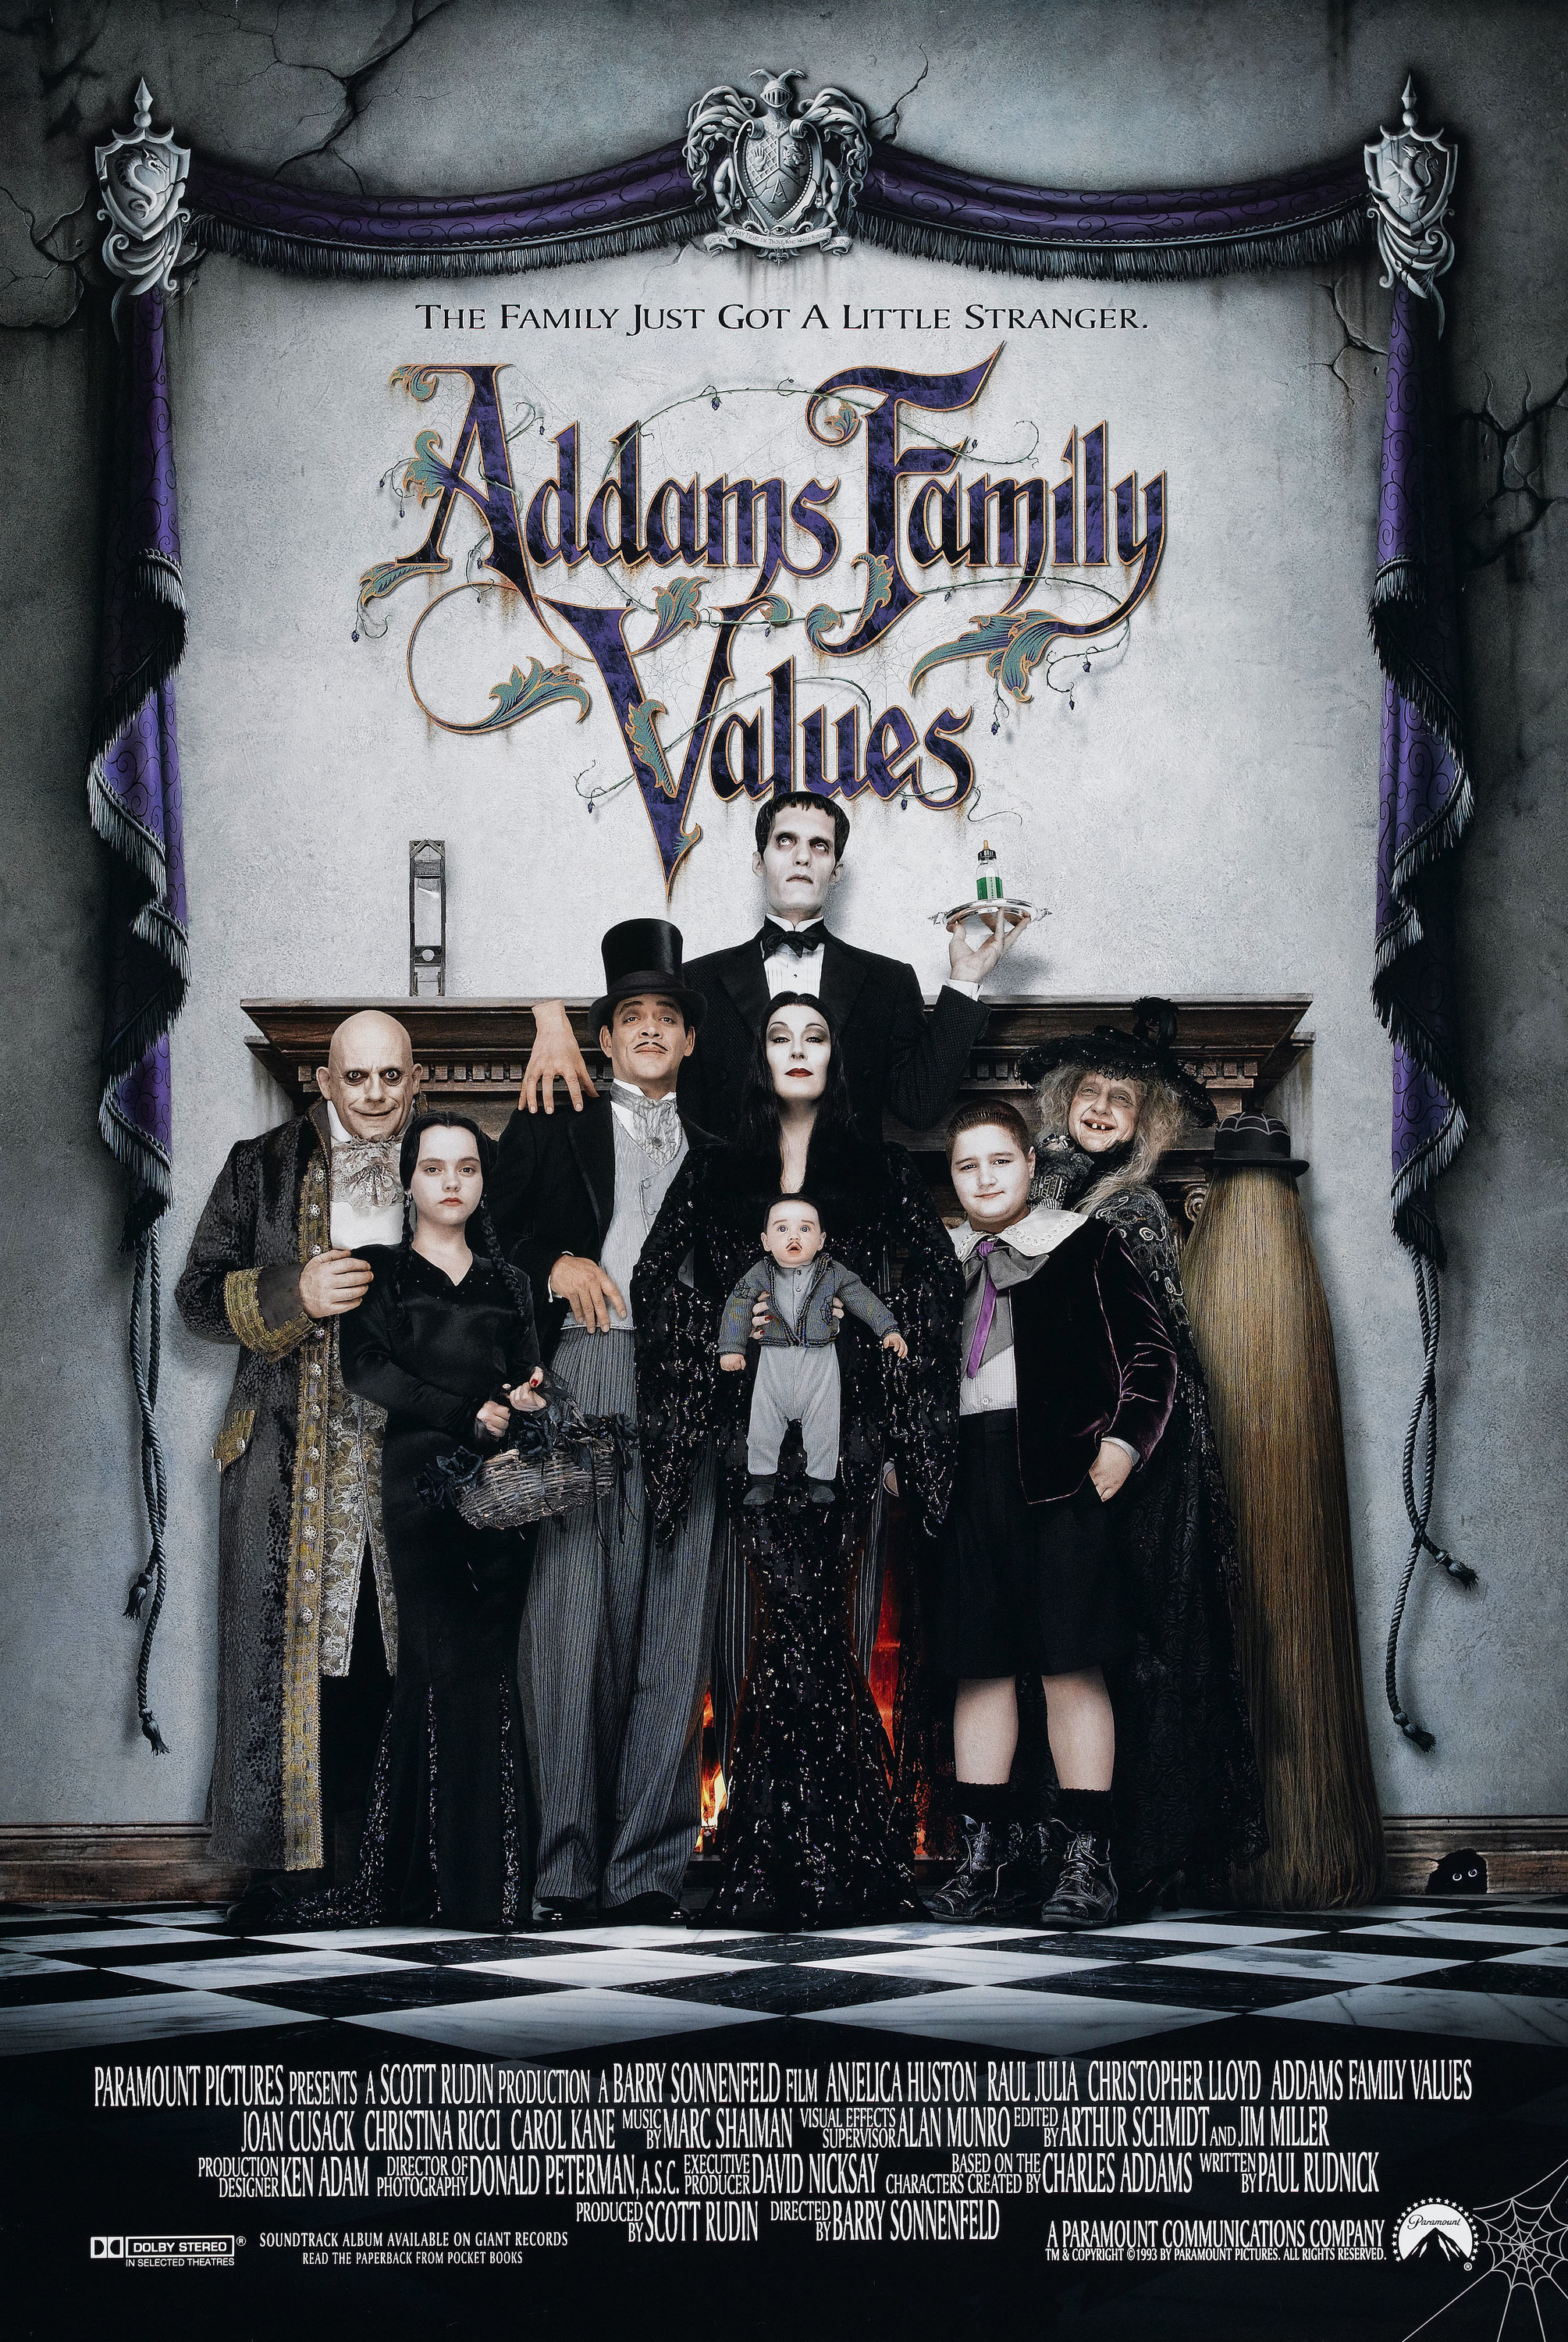 Thing (The Addams Family) - Wikipedia